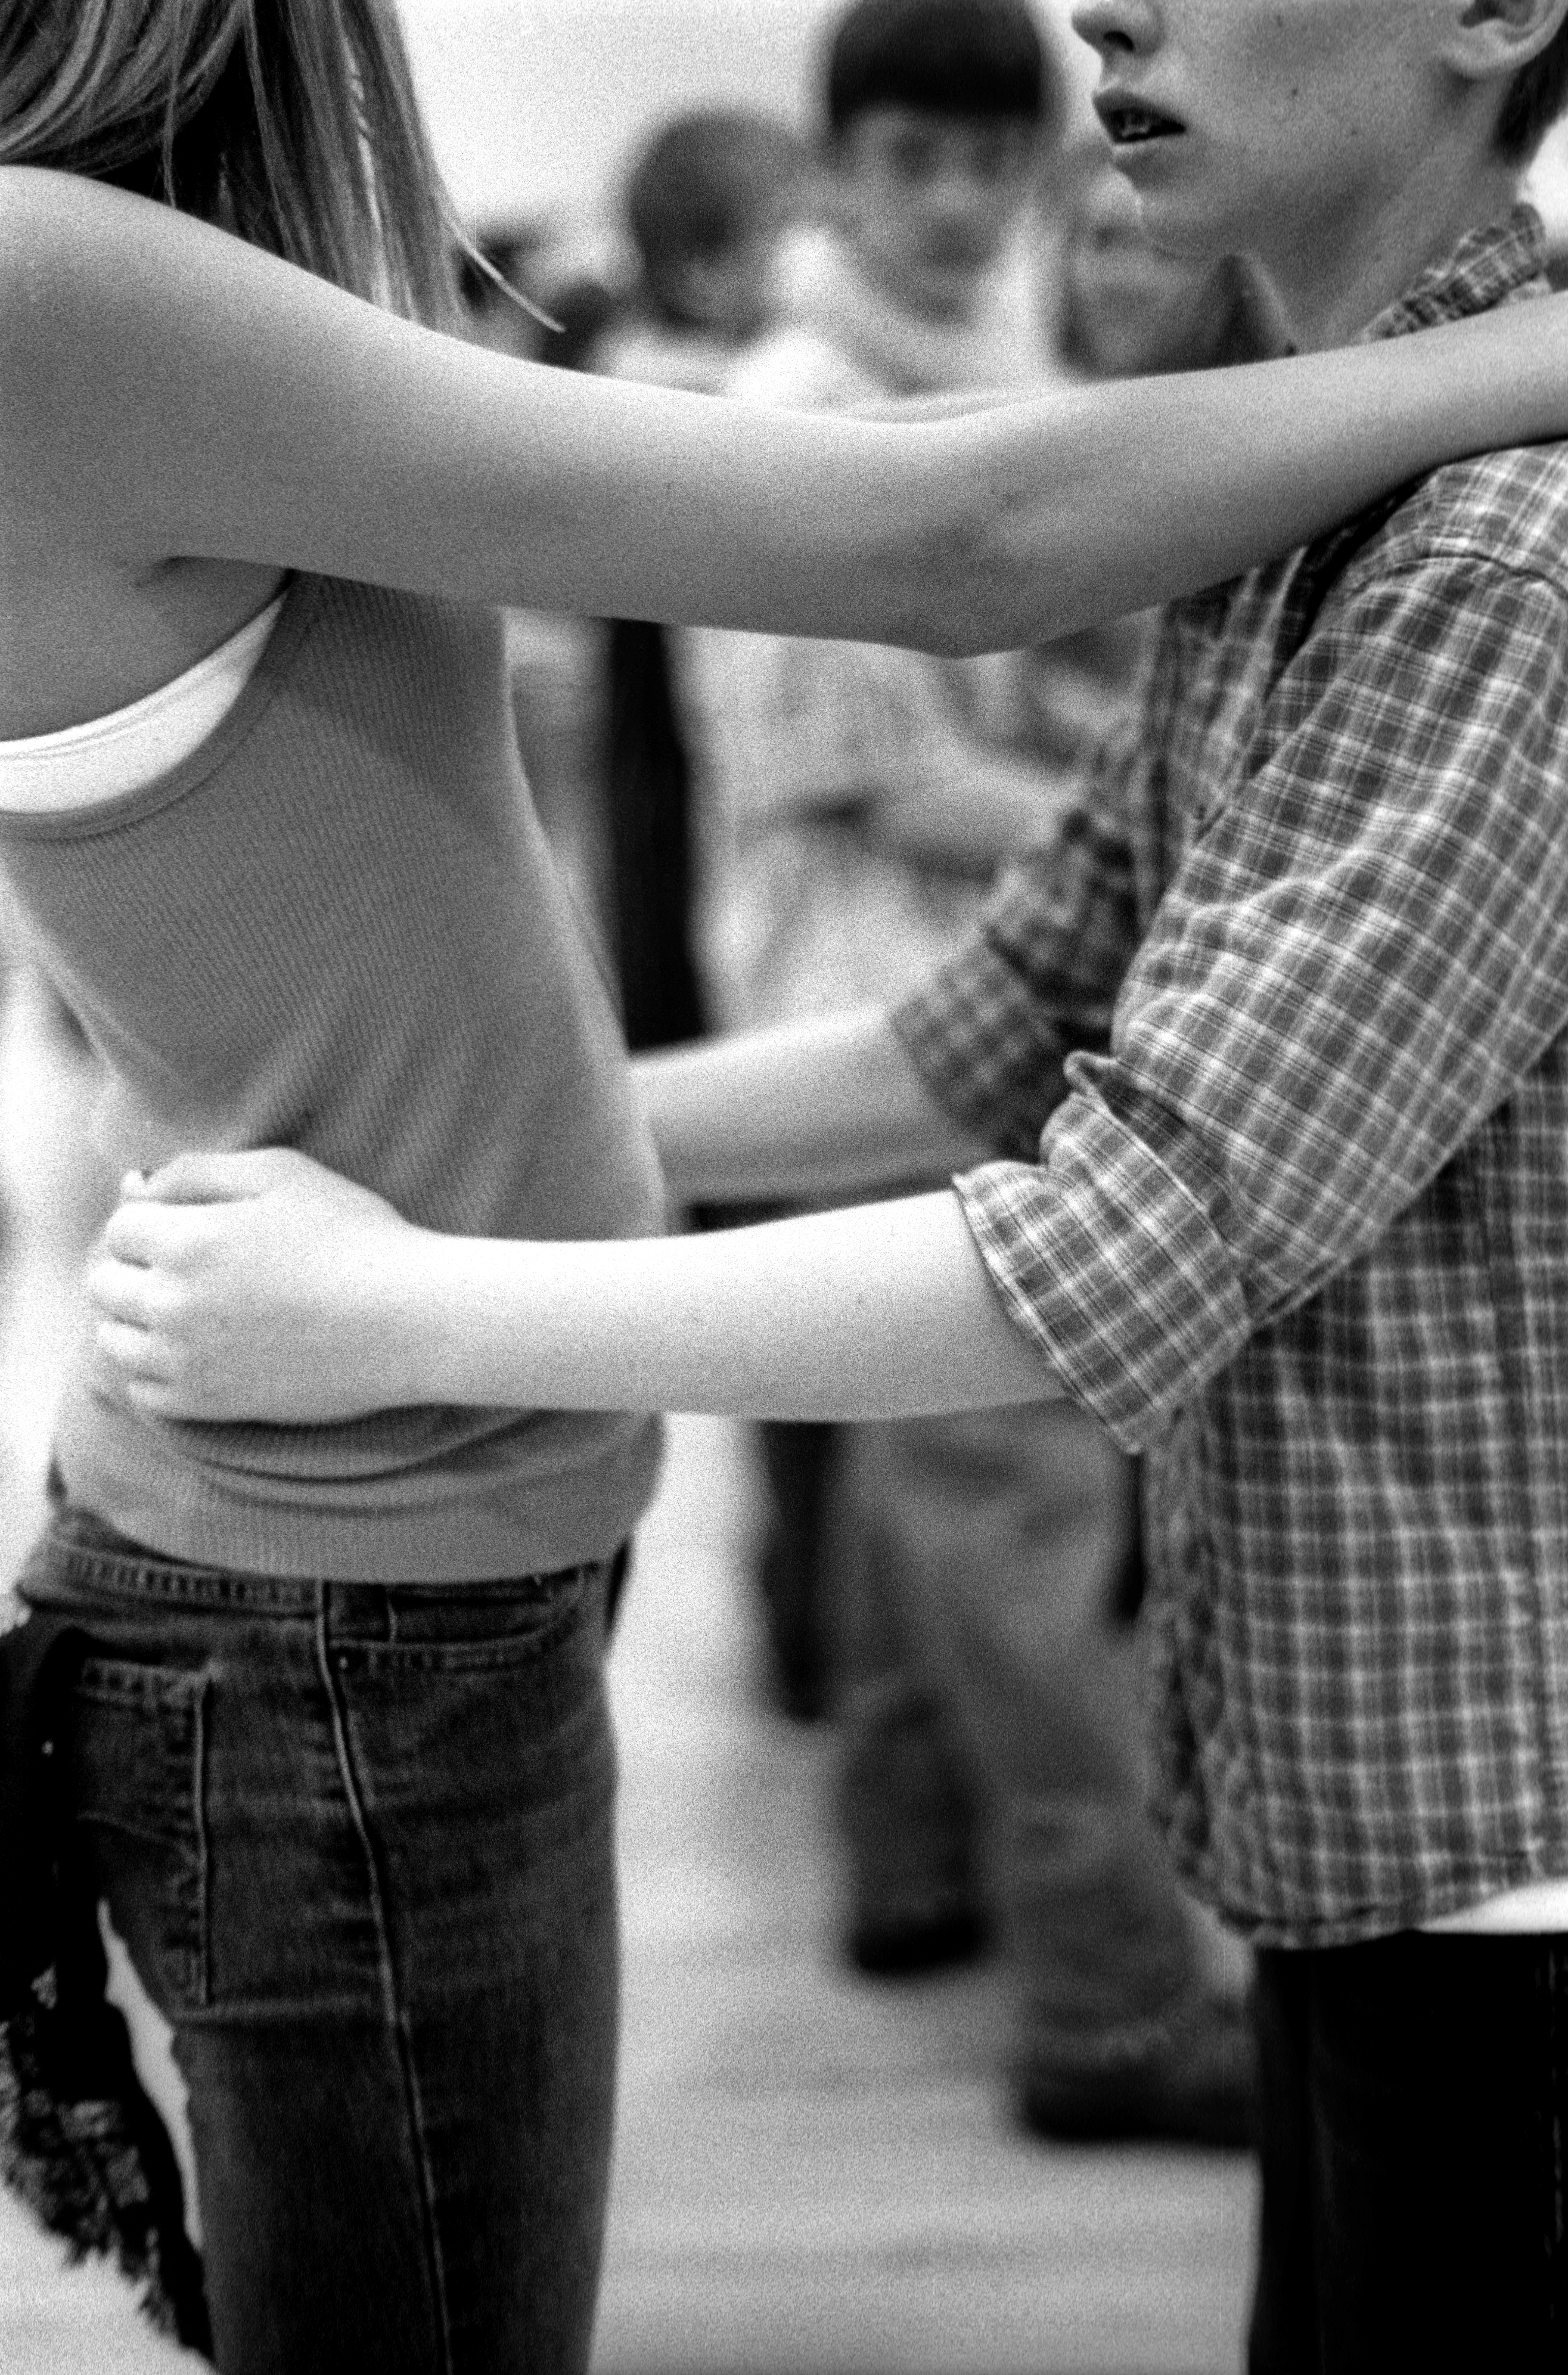 A teenage boy and girl are slow dancing. He has his hands on her waist and her forearms are resting on his shoulders, and there is distance between them. In the background, blurred, are other teen couples dancing.